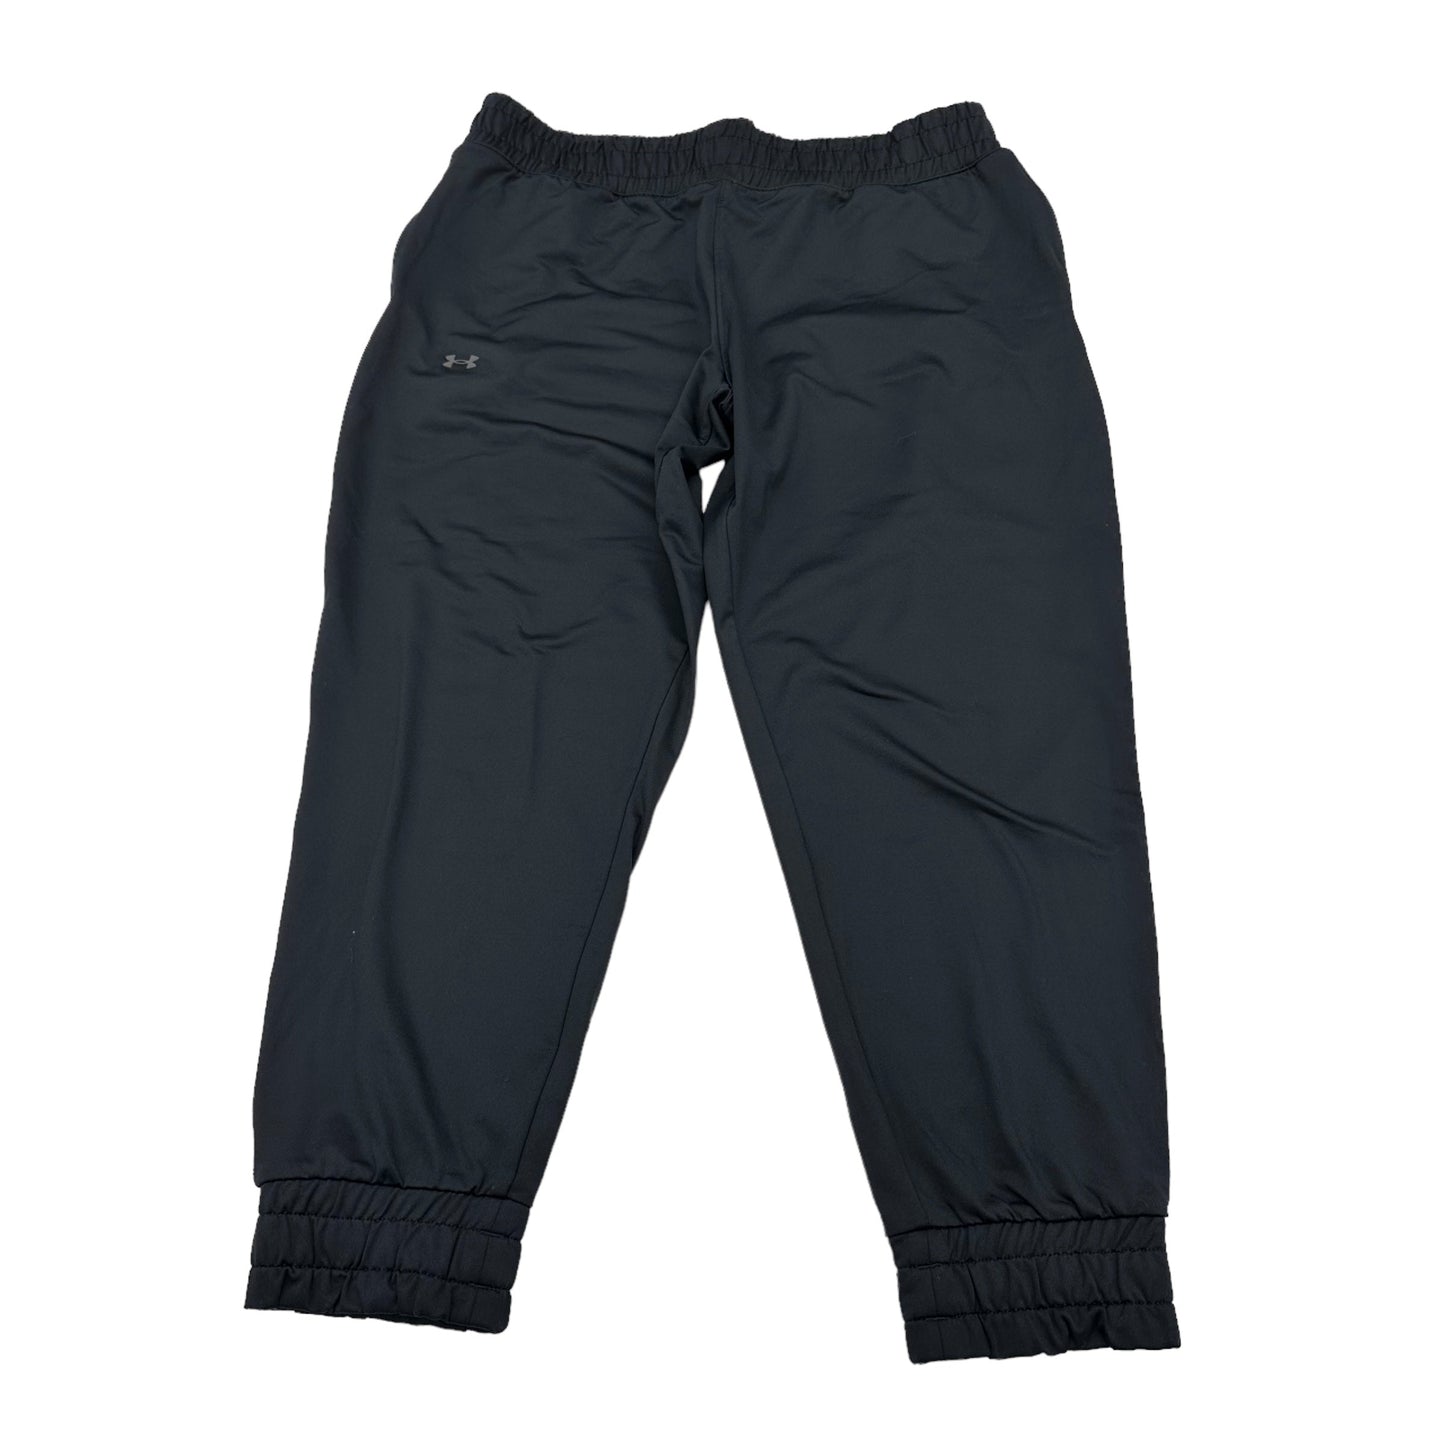 Athletic Pants By Under Armour  Size: L